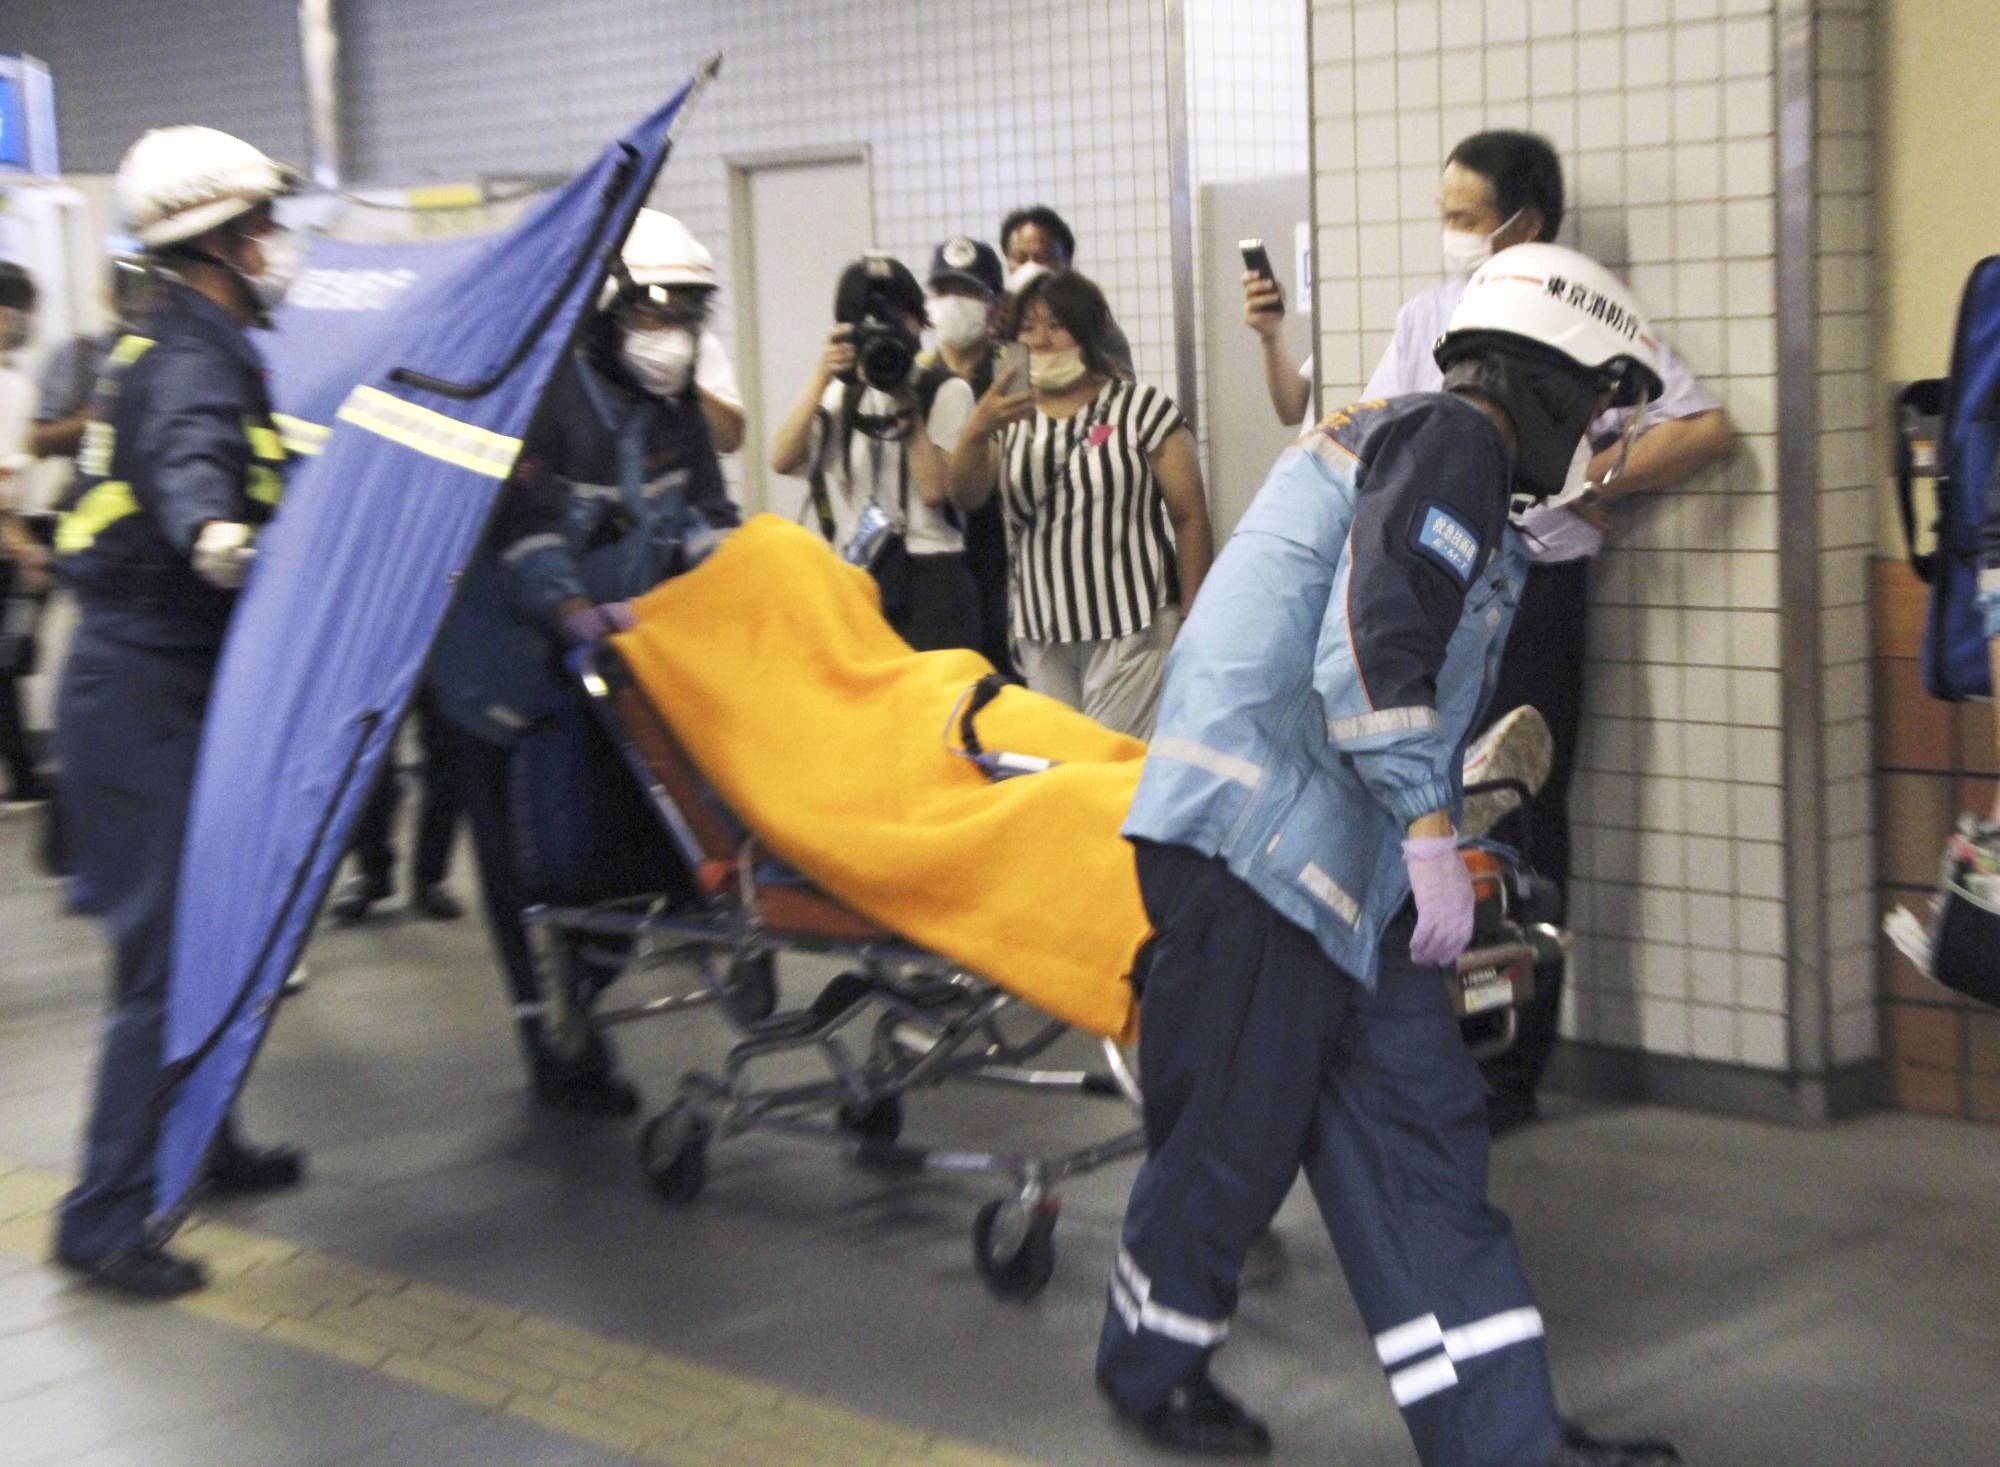 Paramedics carry an injured passenger from an Odakyu Electric Railway train on Friday in Tokyo, after a man went on a stabbing rampage inside the train. | KYODO